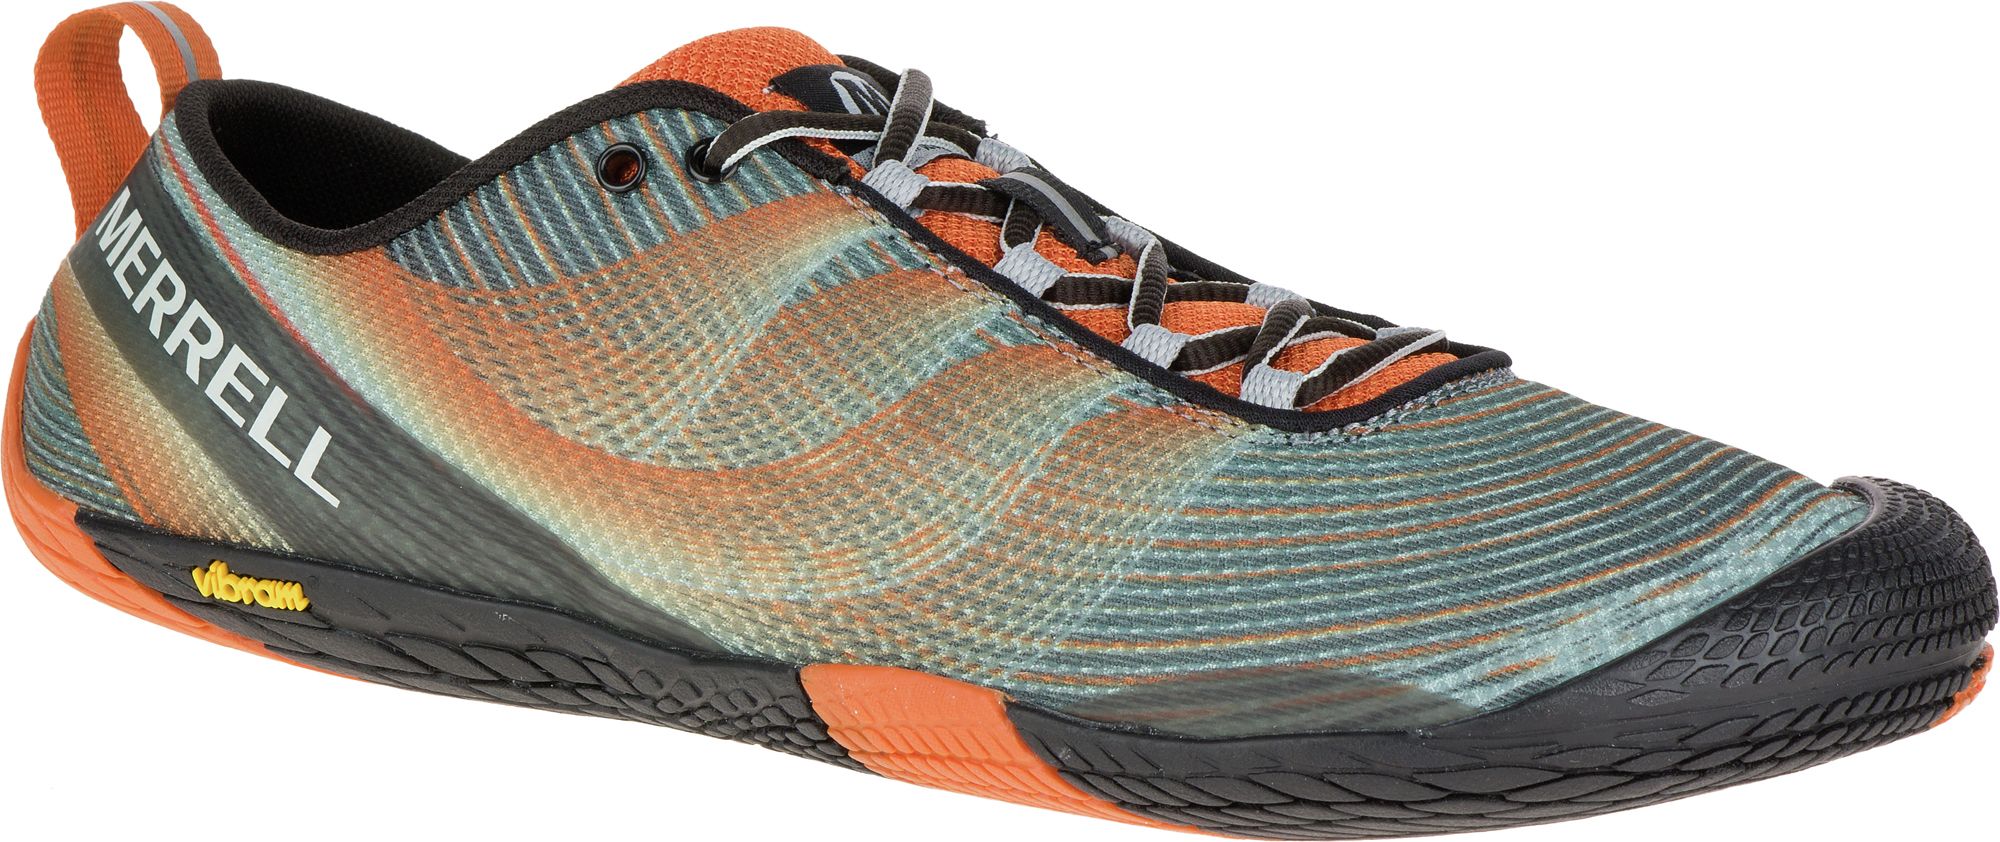 Merrell Hiking Shoes & Boots | DICK'S Sporting Goods